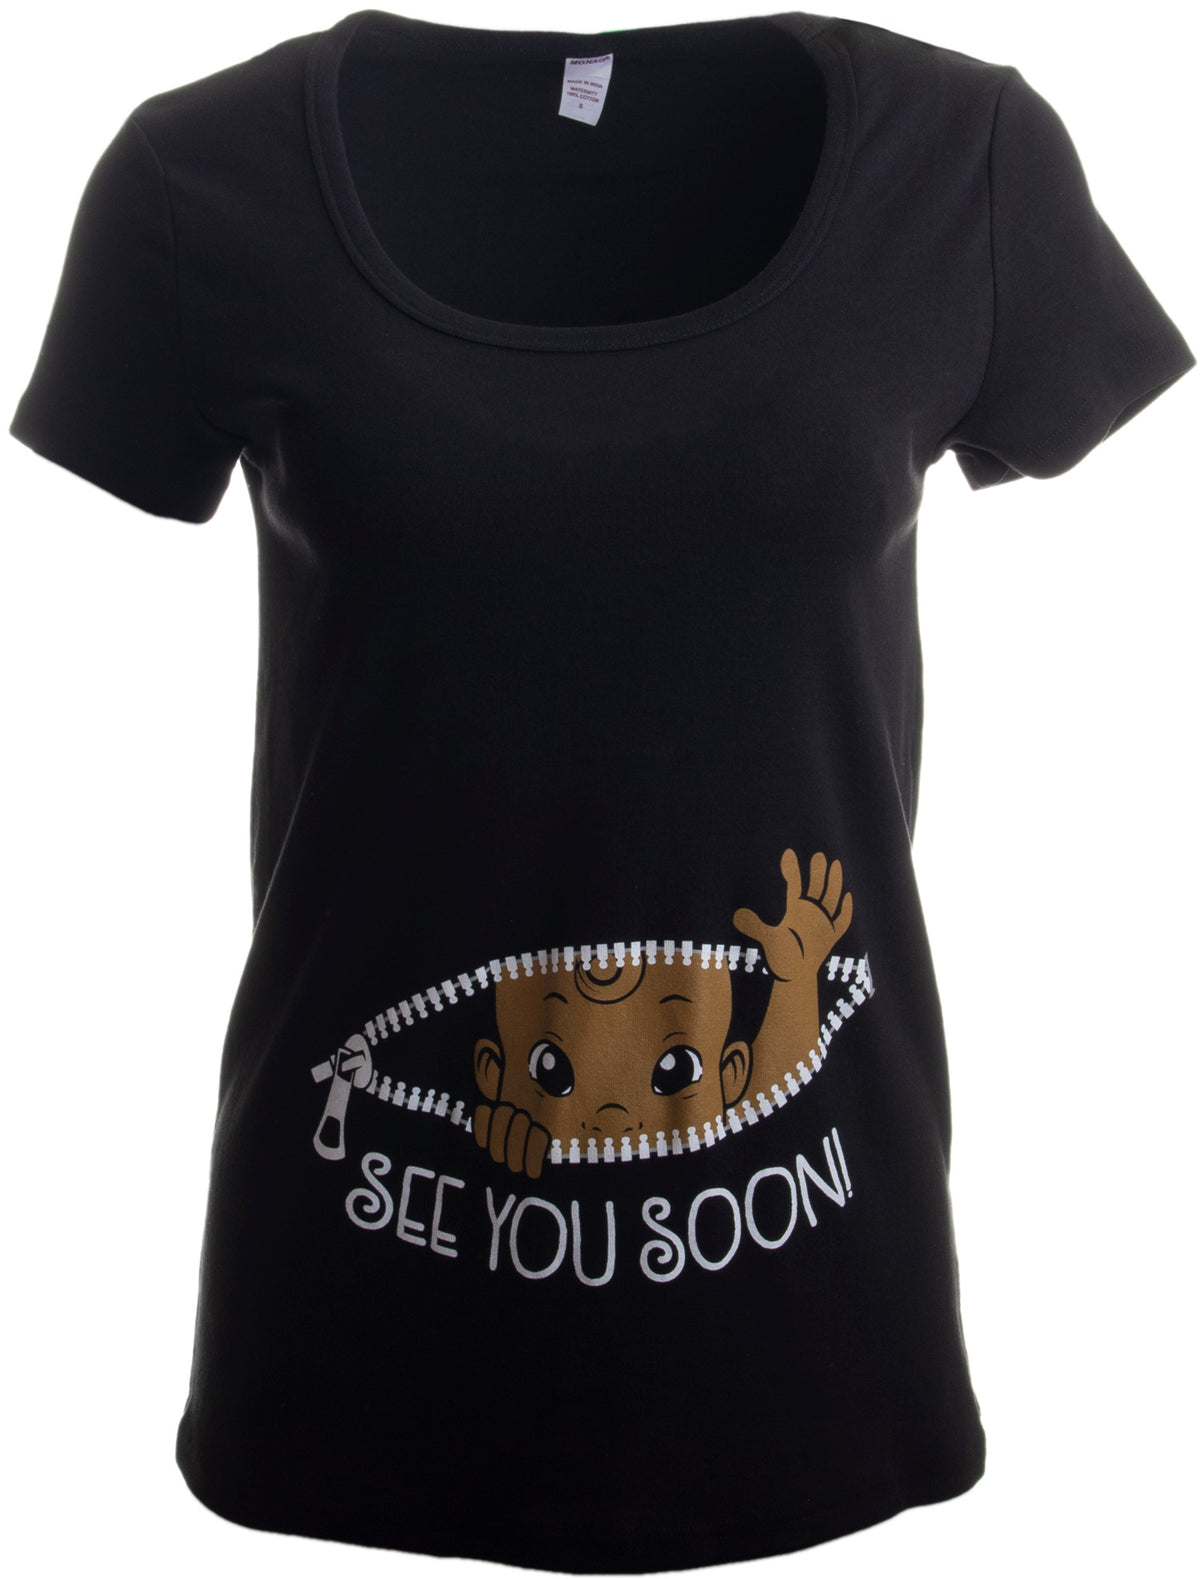 "See You Soon! Brown Skin Baby - Cute Funny Maternity Top, Pregnancy T-shirt"